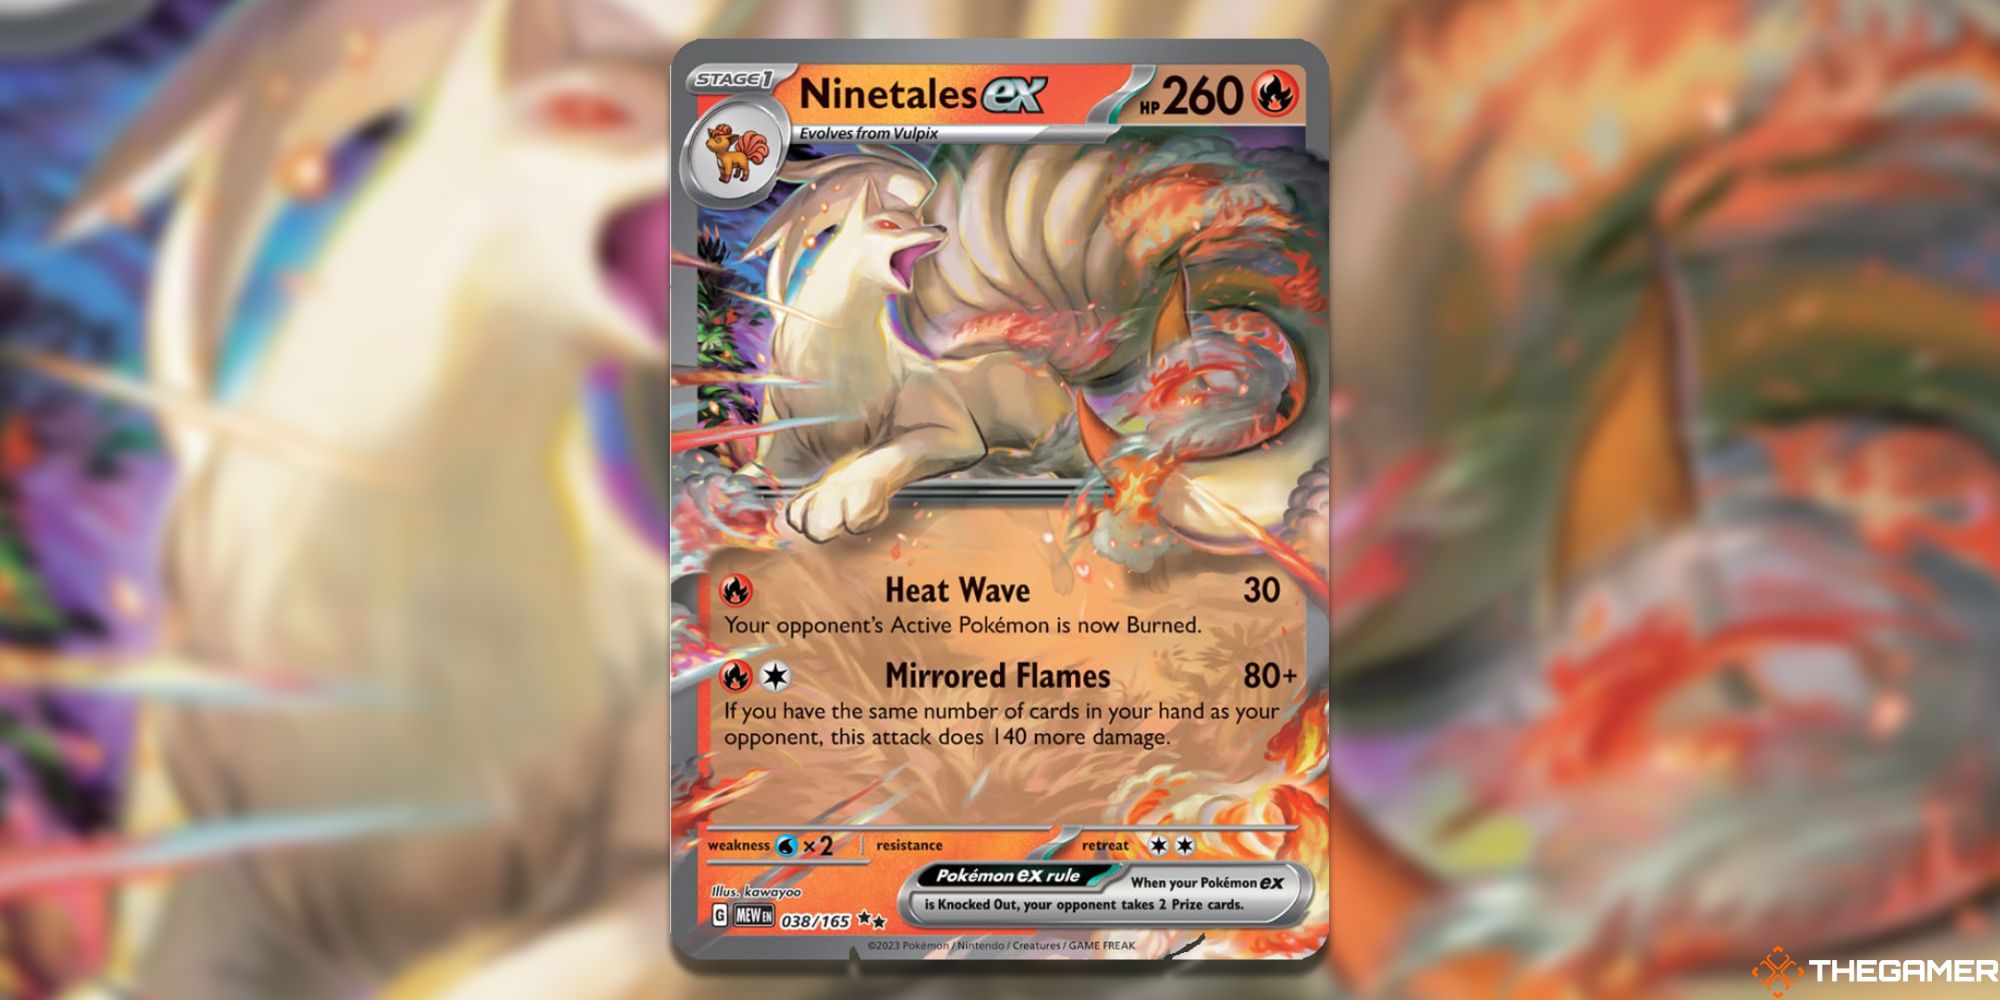 Image of the Ninetales ex card in Magic: The Gathering, with art by kawayoo